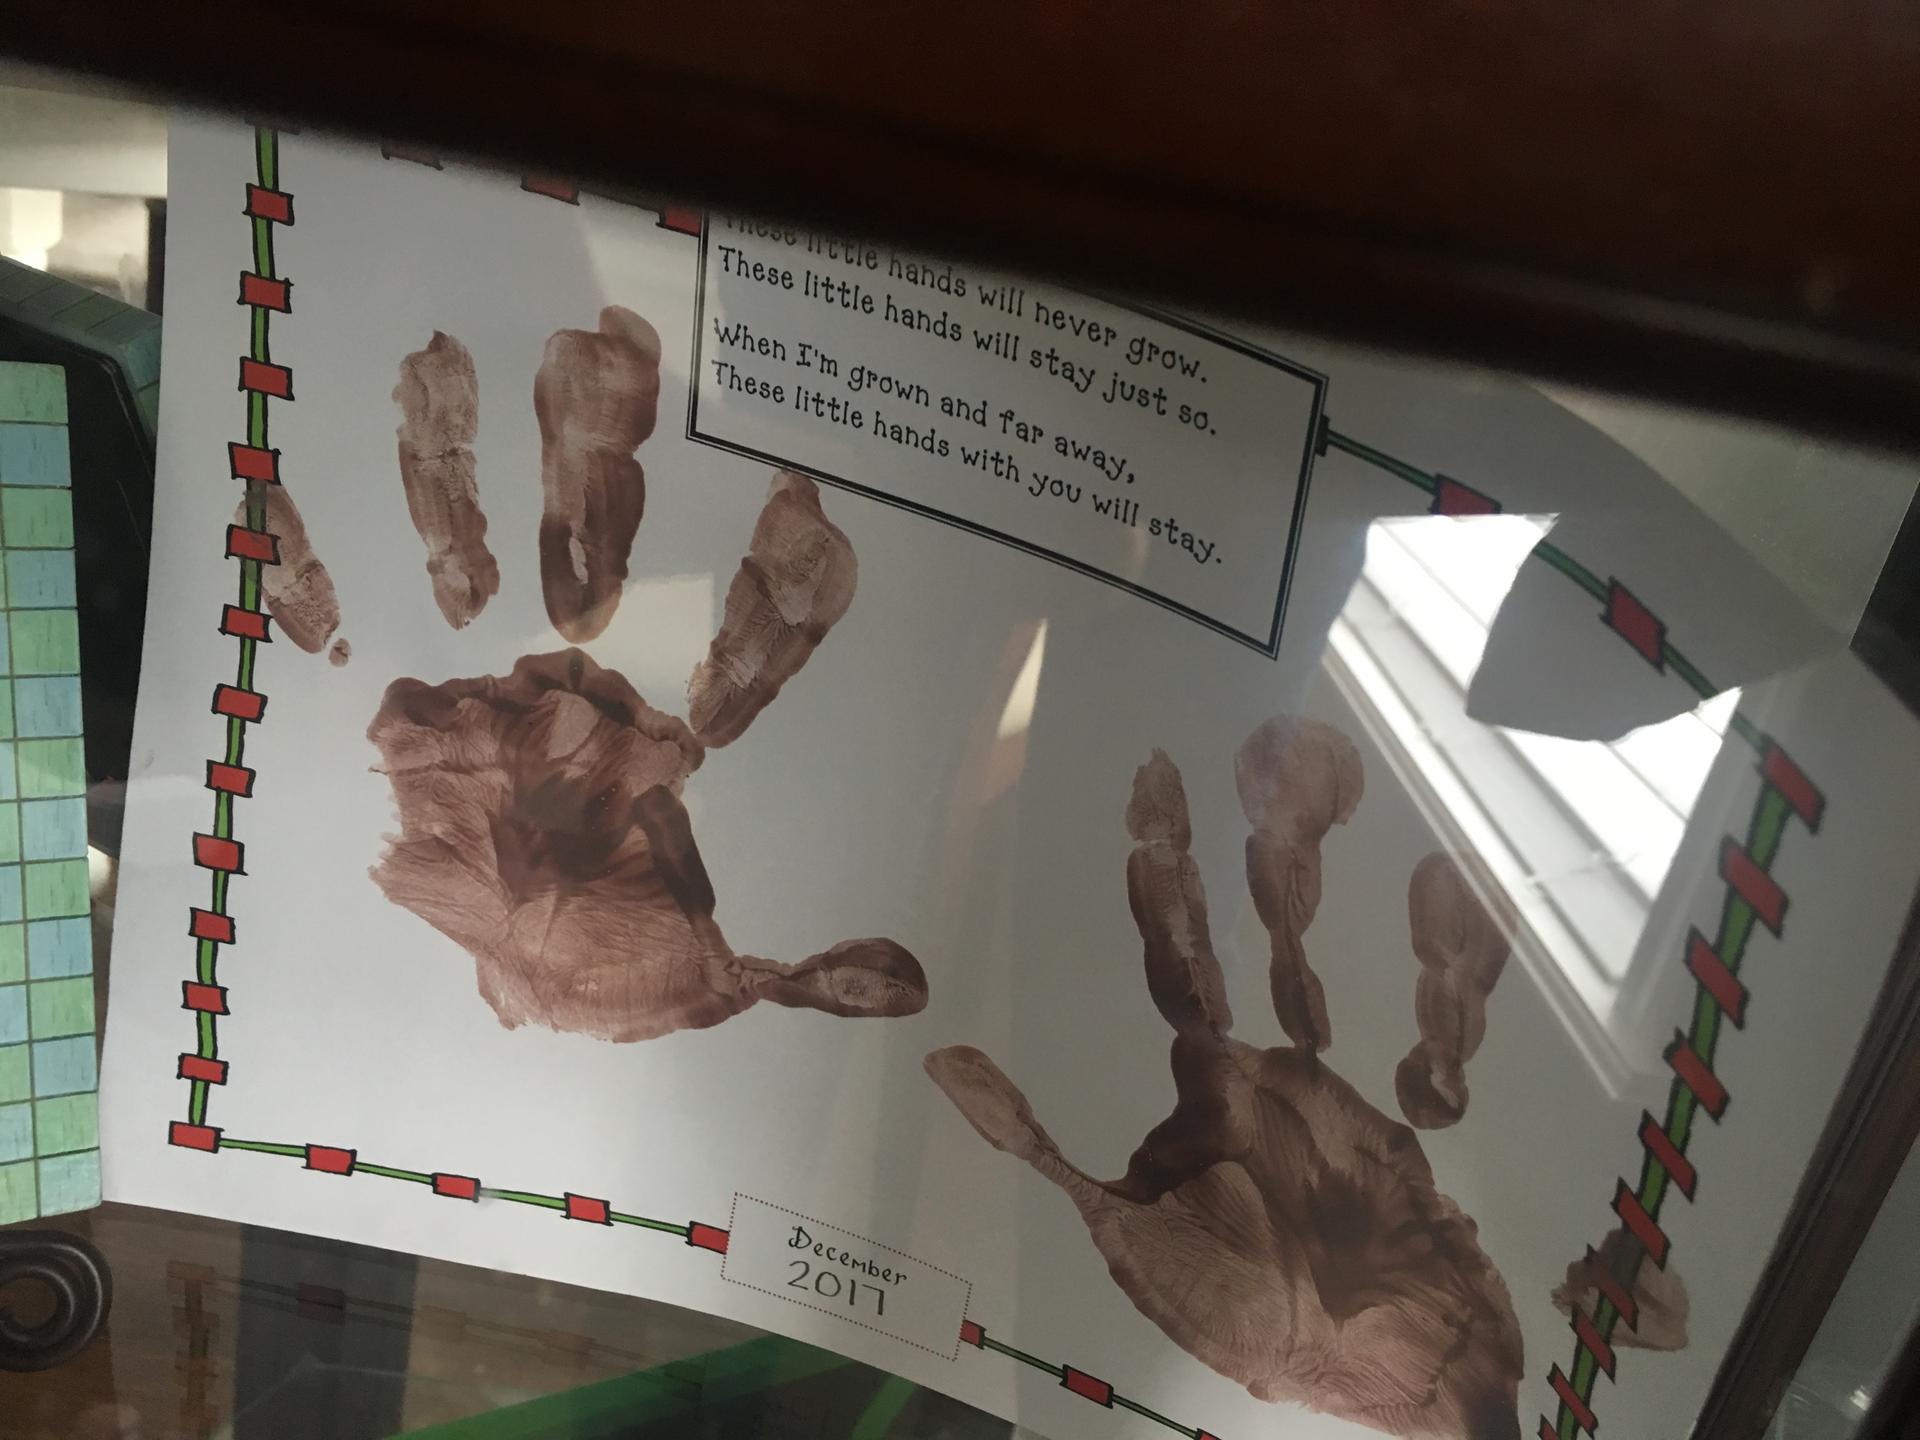 School project of child's hand prints with poem, "When I'm grown and far away, these little hands with you will stay"